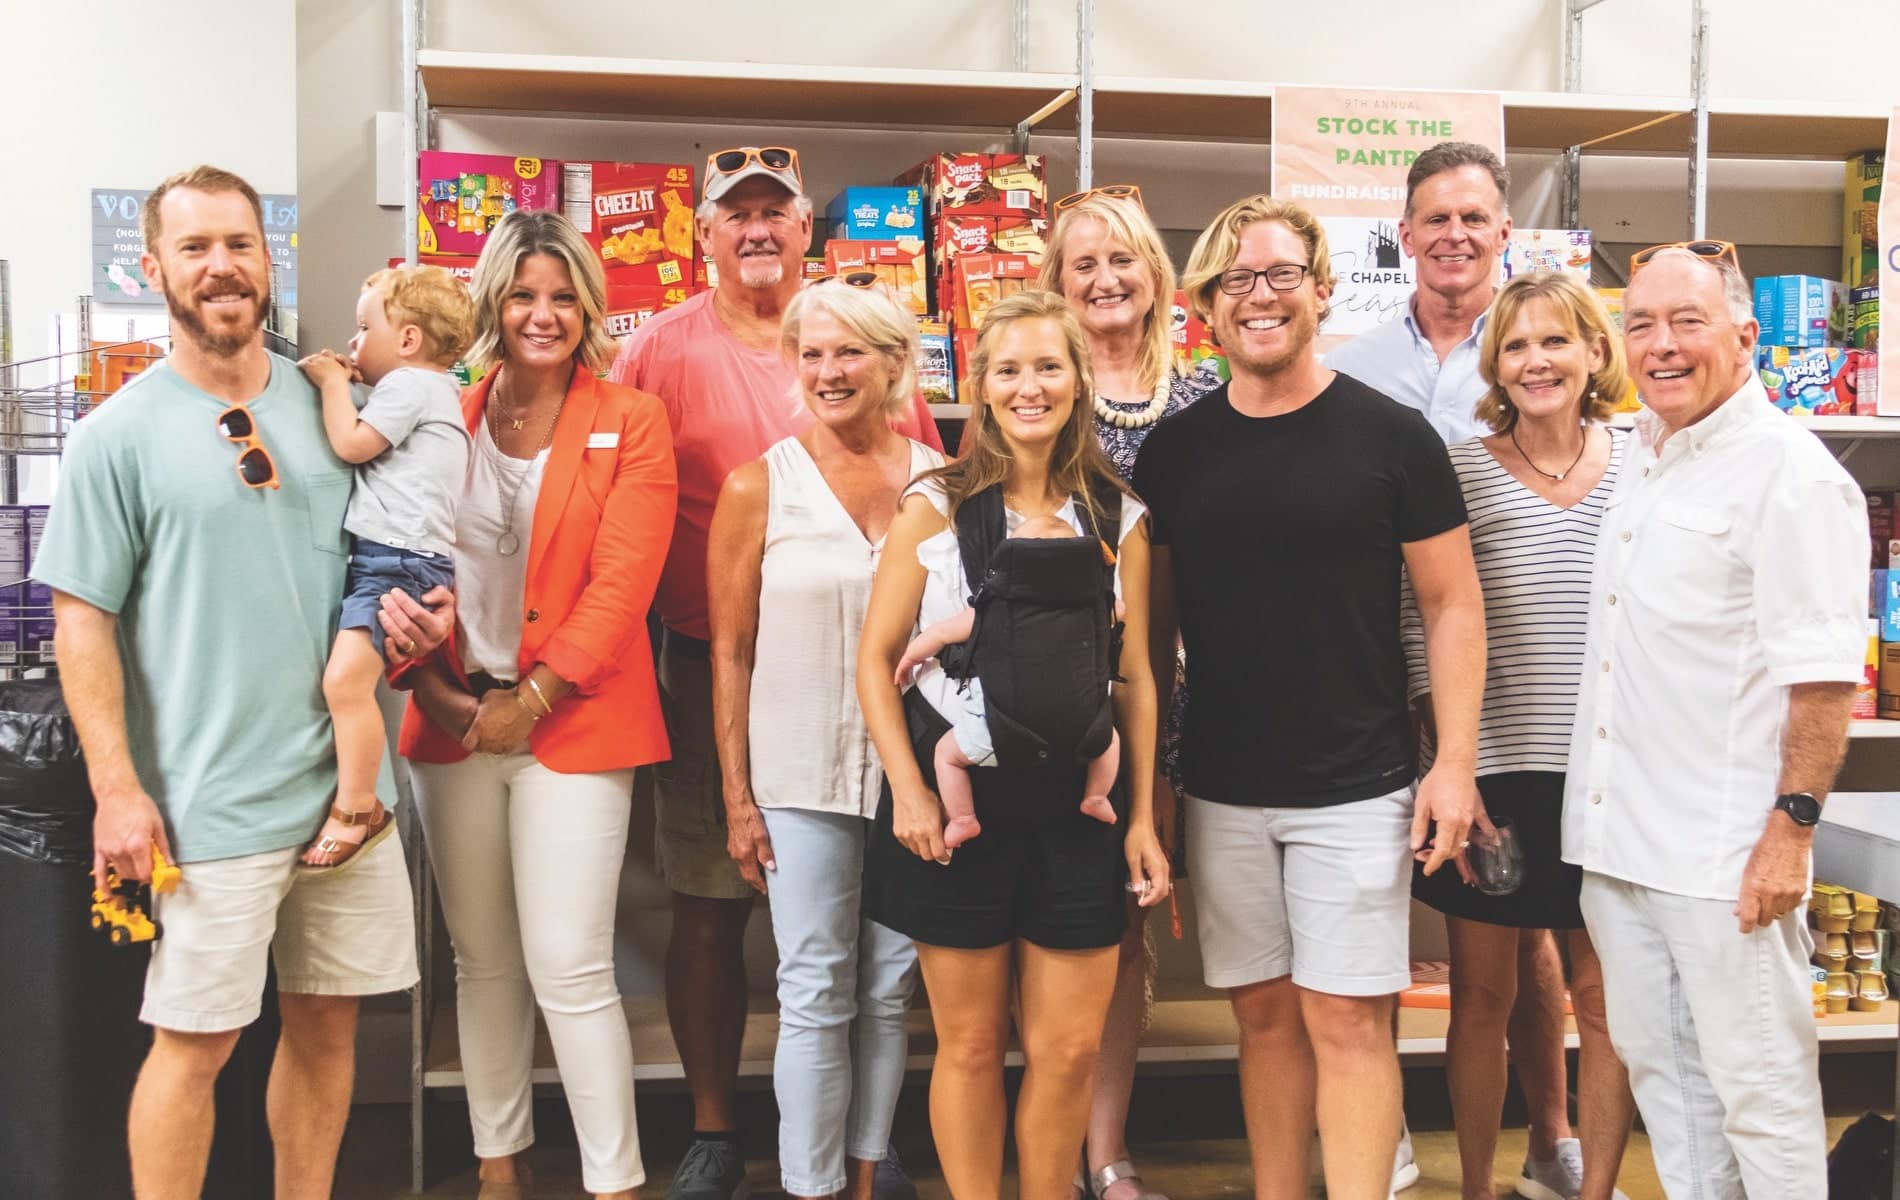 Ninth Annual Stock the Pantry Party